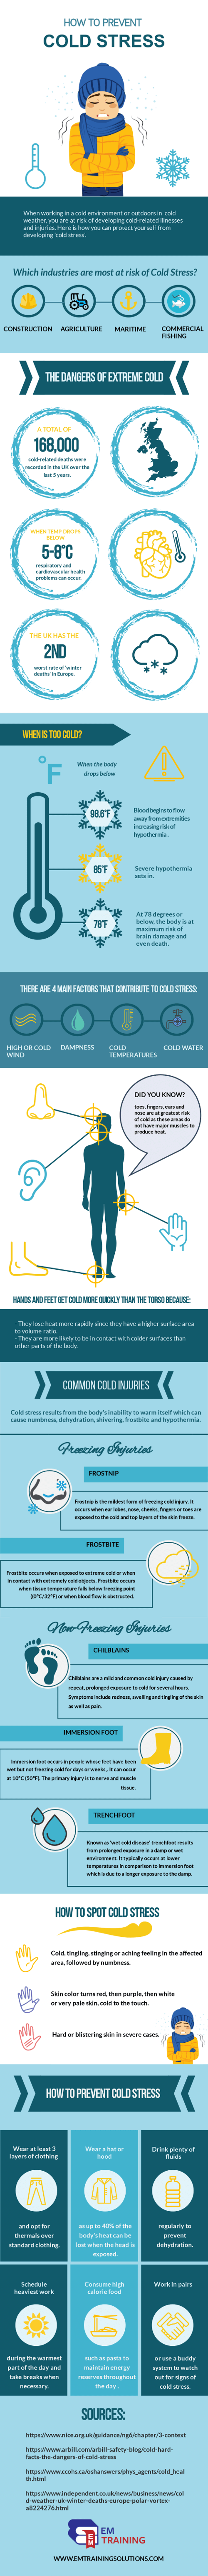 How To Prevent Cold Stress infographic